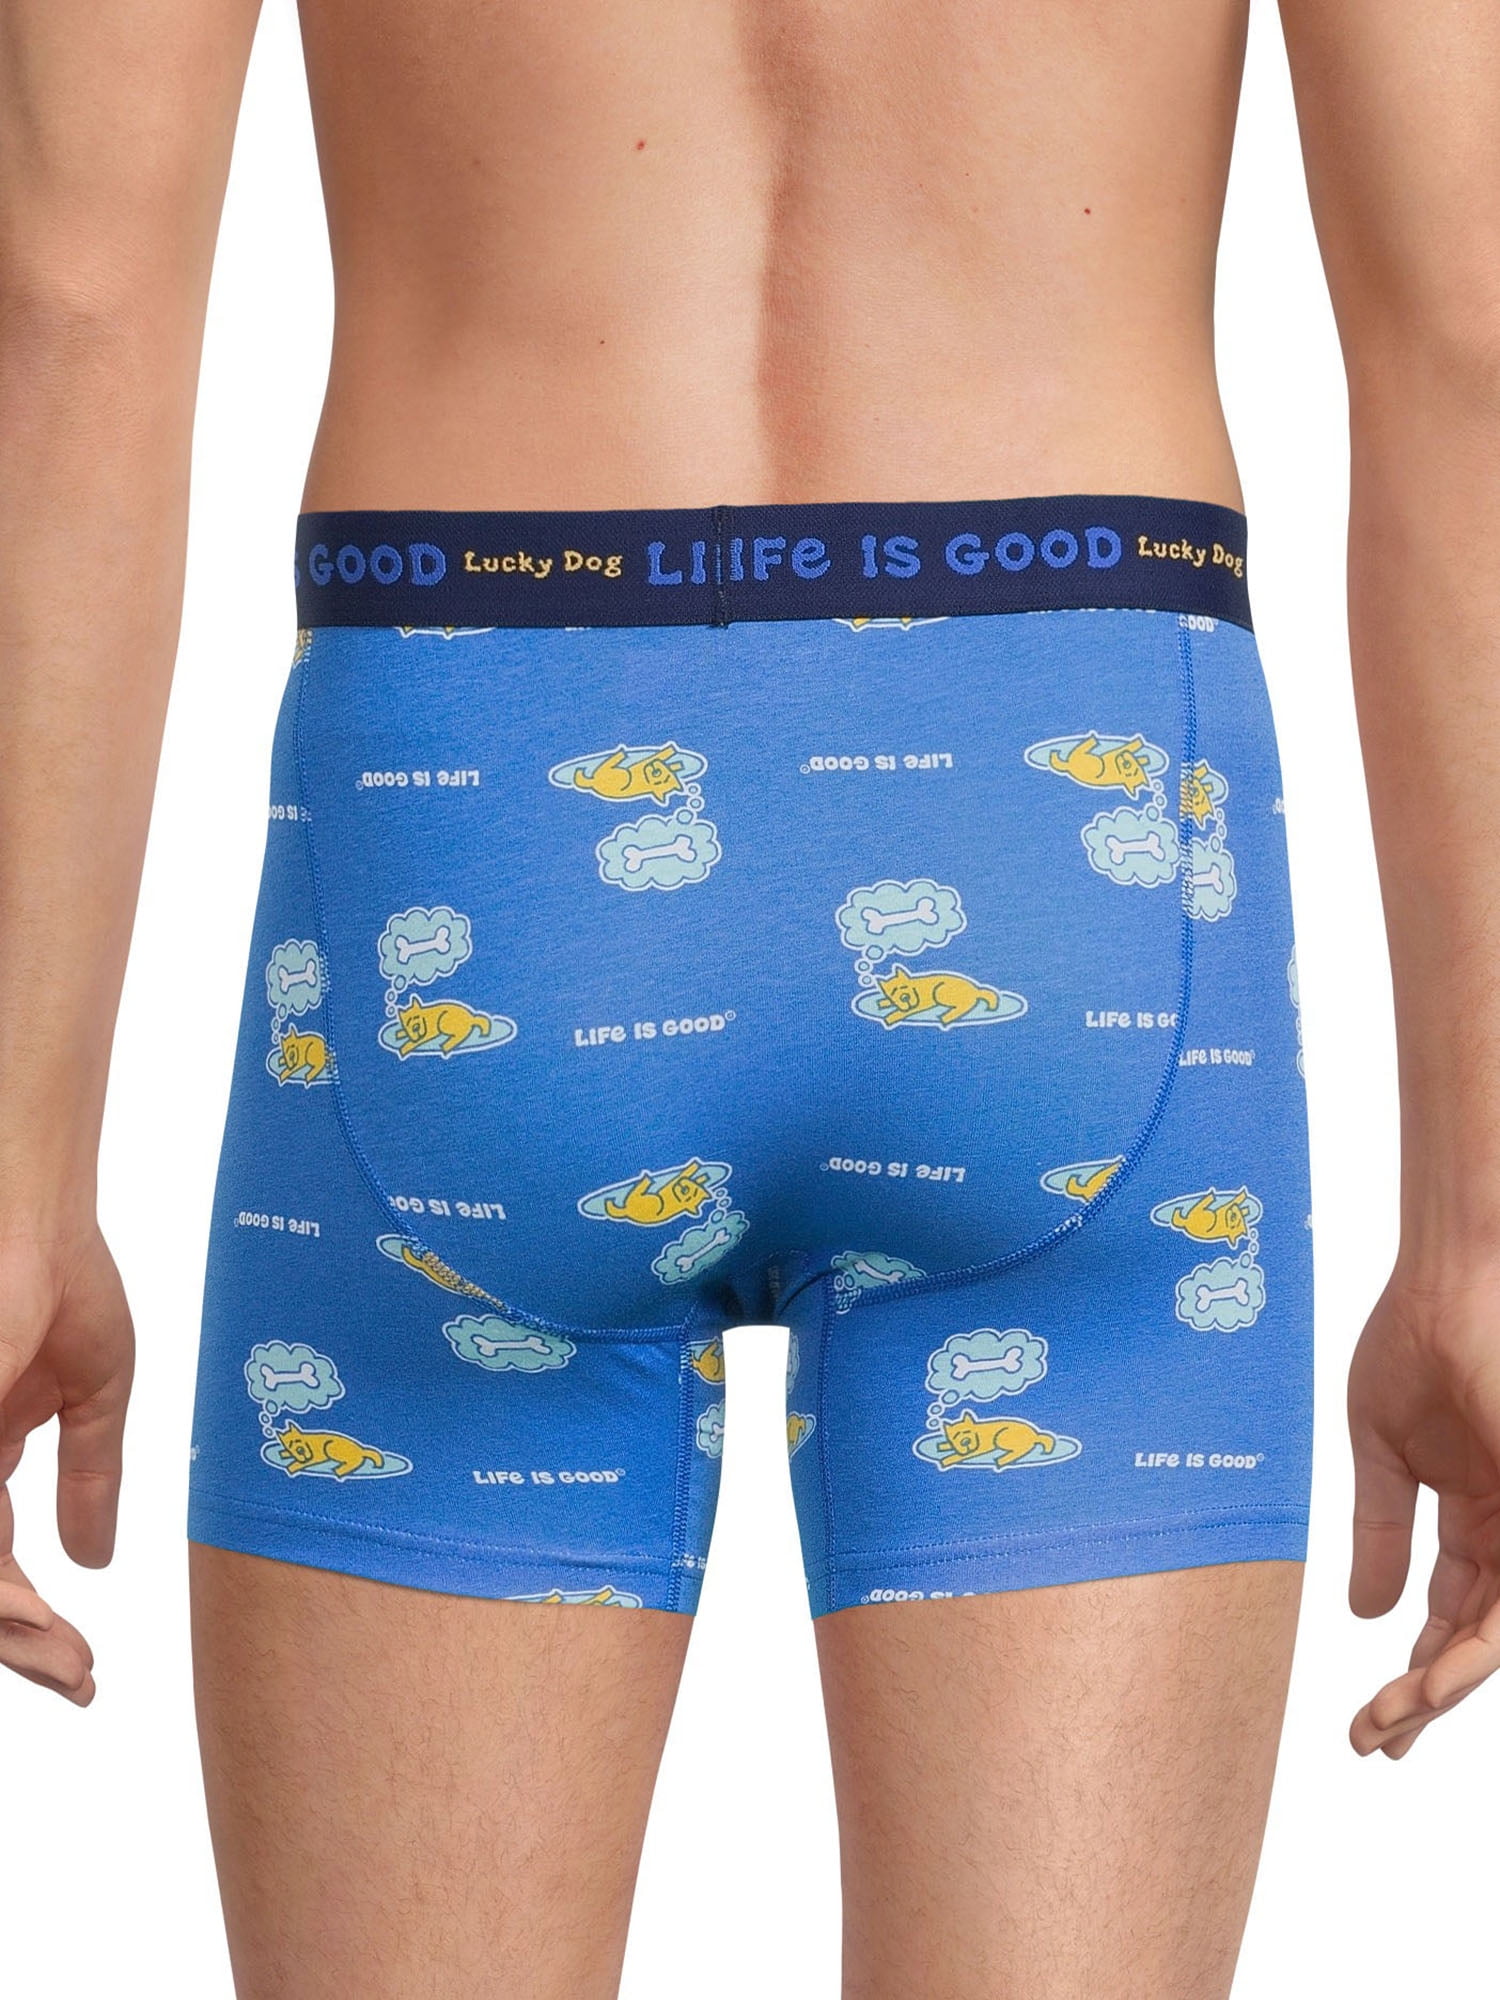 Life is Good Women's Underwear - Casual Stretch Bikini Briefs (3 Pack),  Size Small, Blue PrintCitadelBlue at  Women's Clothing store